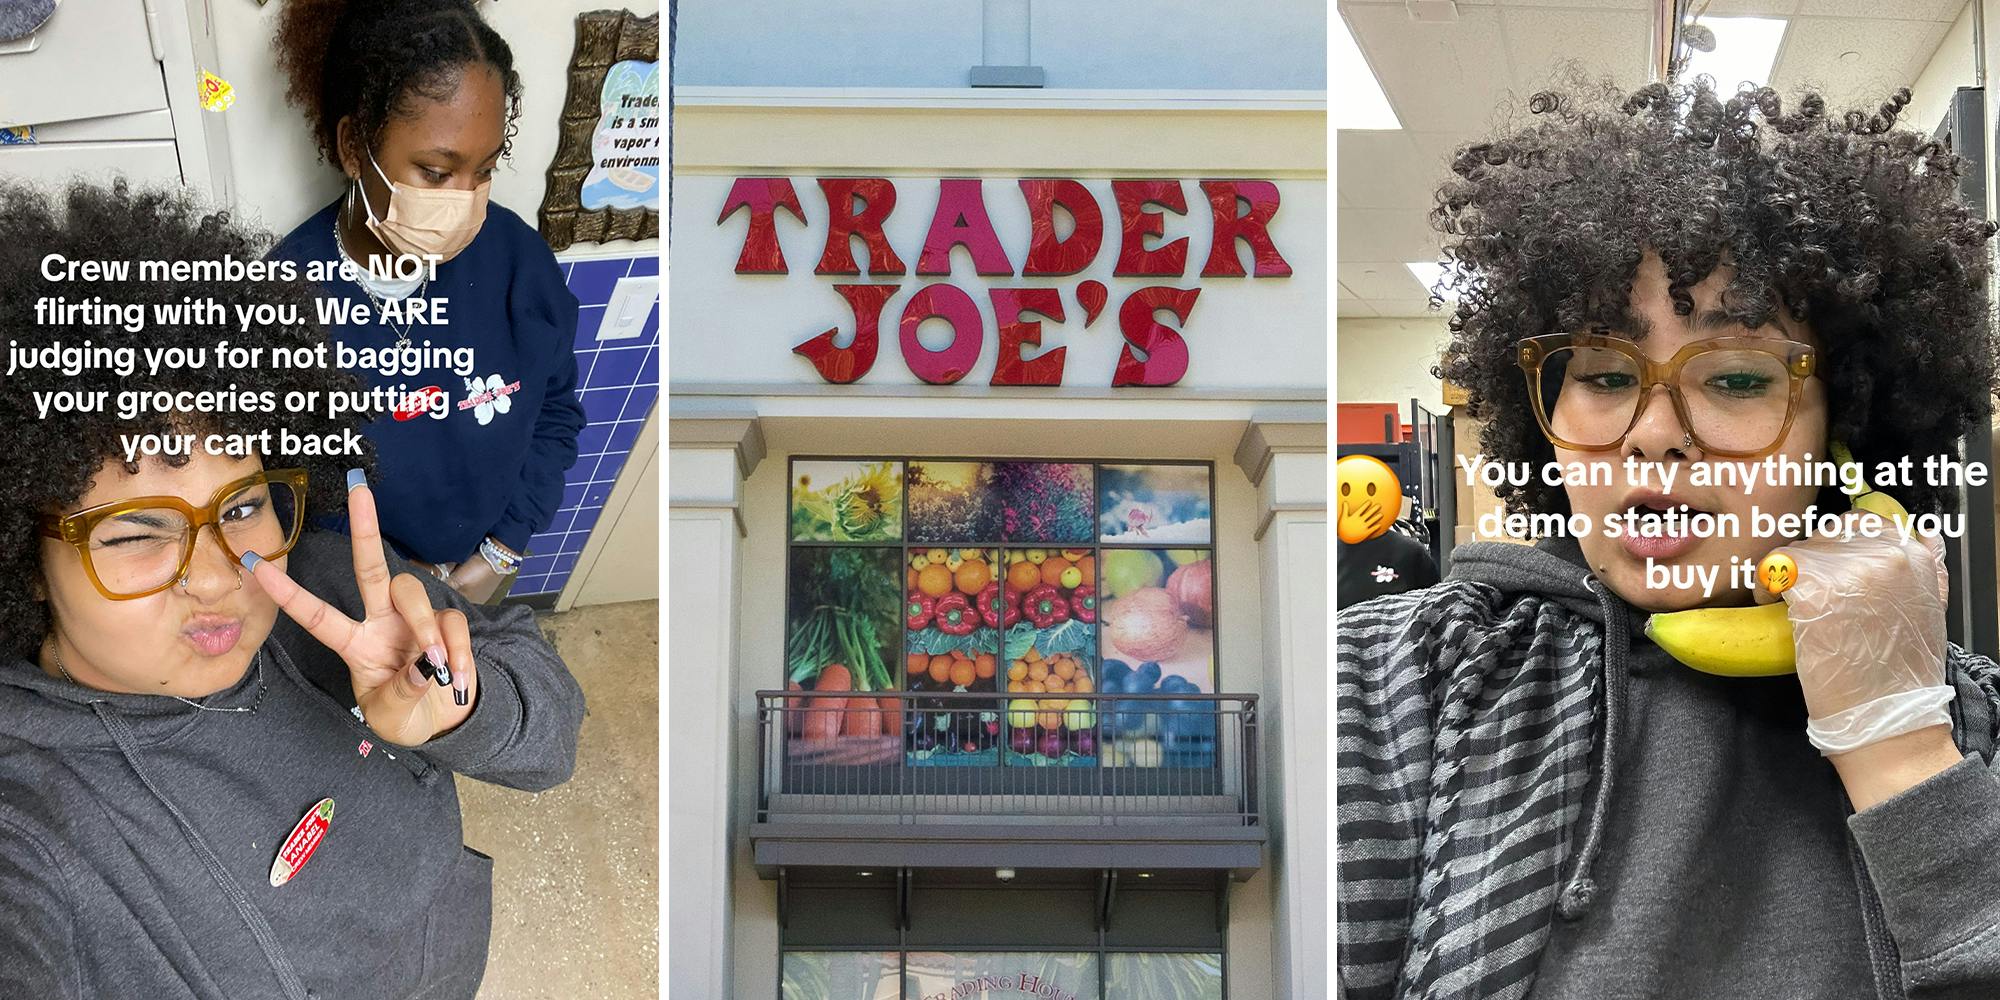 ‘We ARE judging you’: Trader Joe’s worker says you’re supposed to bag your own groceries